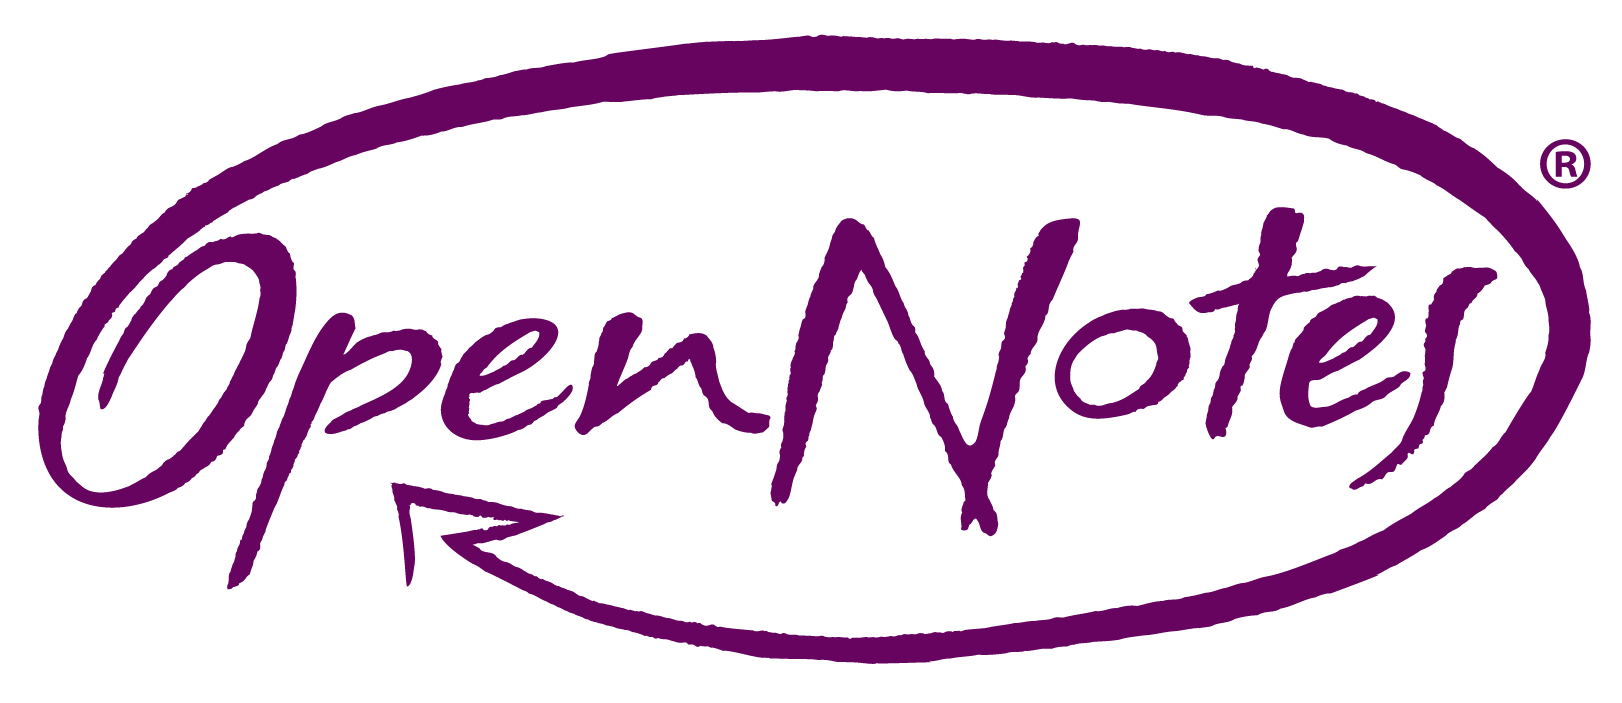 OPENNOTE. UC logo PNG.